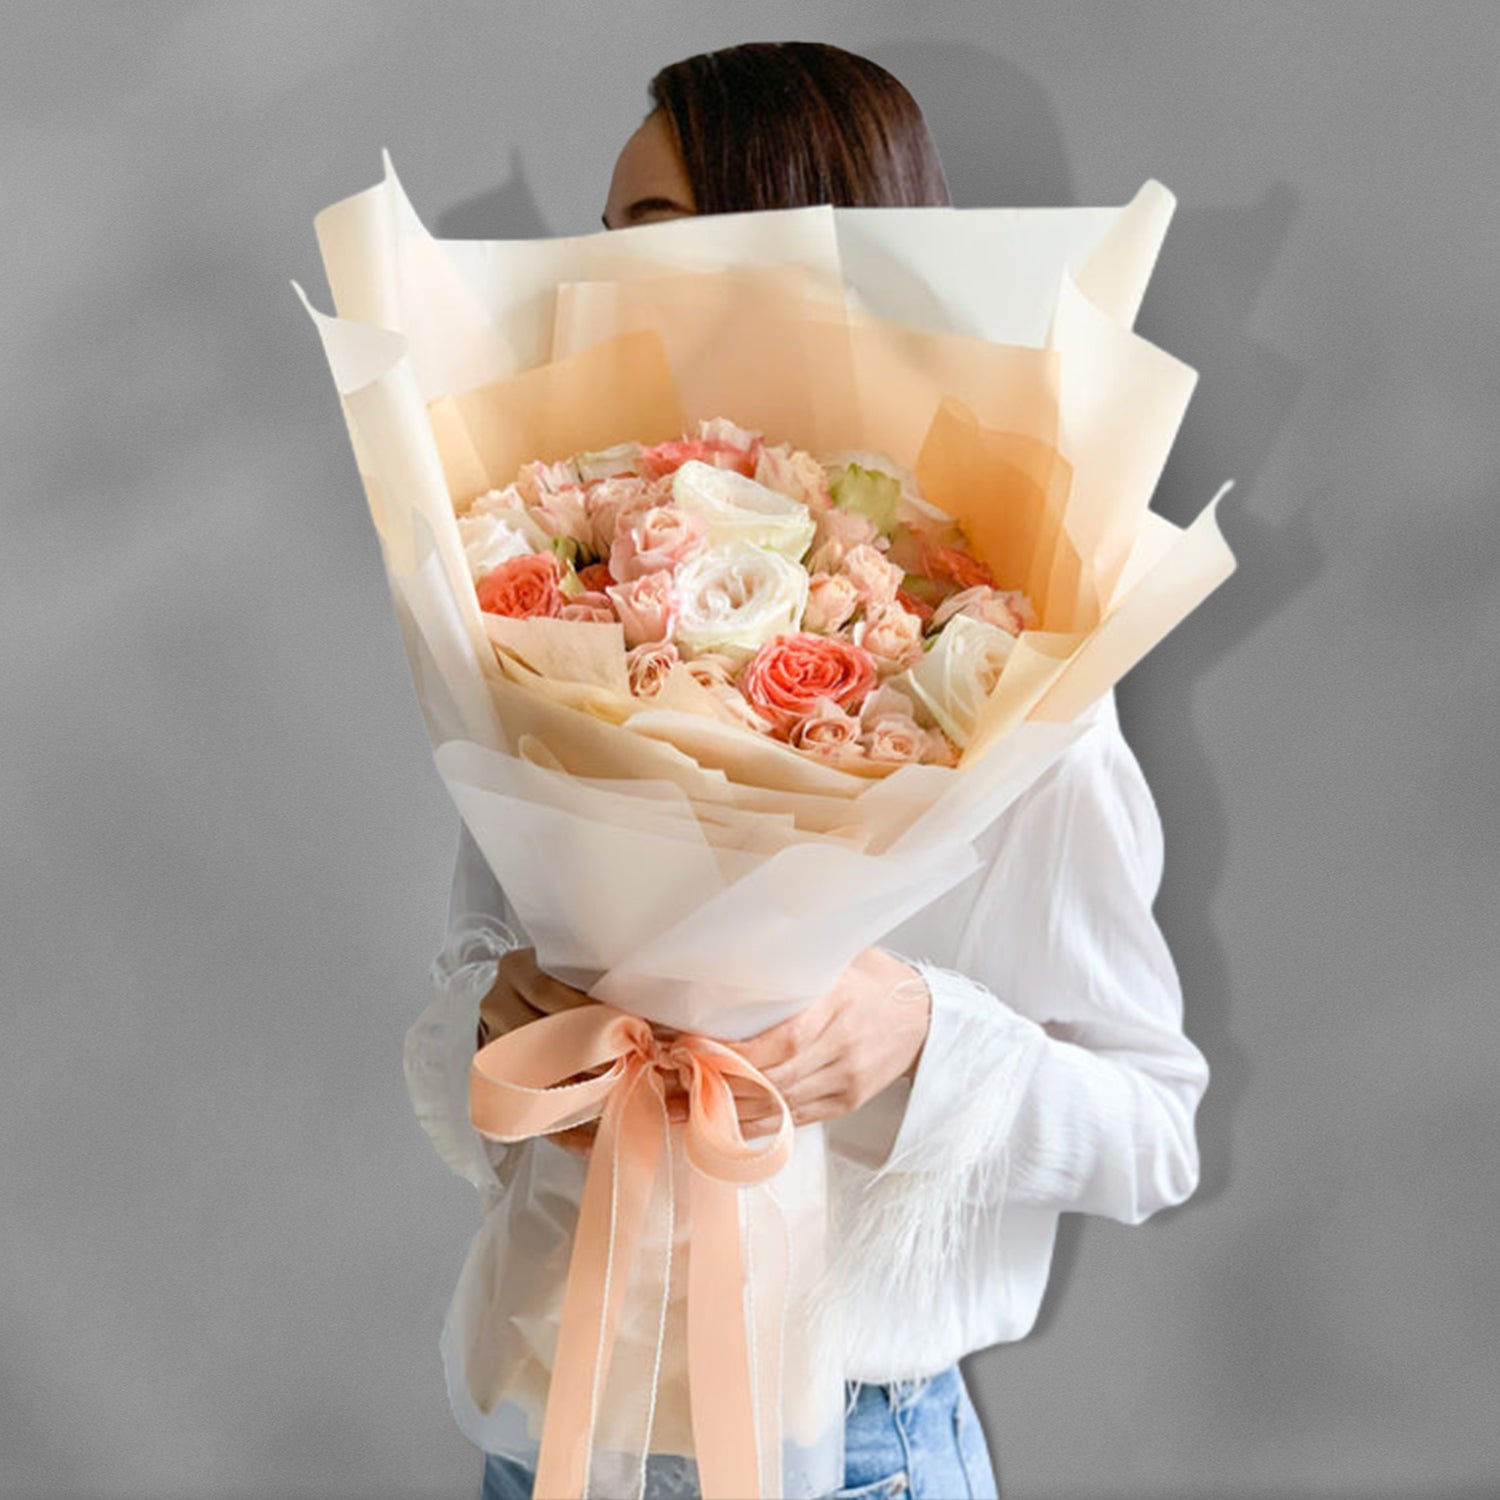 Happy Birthday Red Rose Hand Bouquet in Jeddah